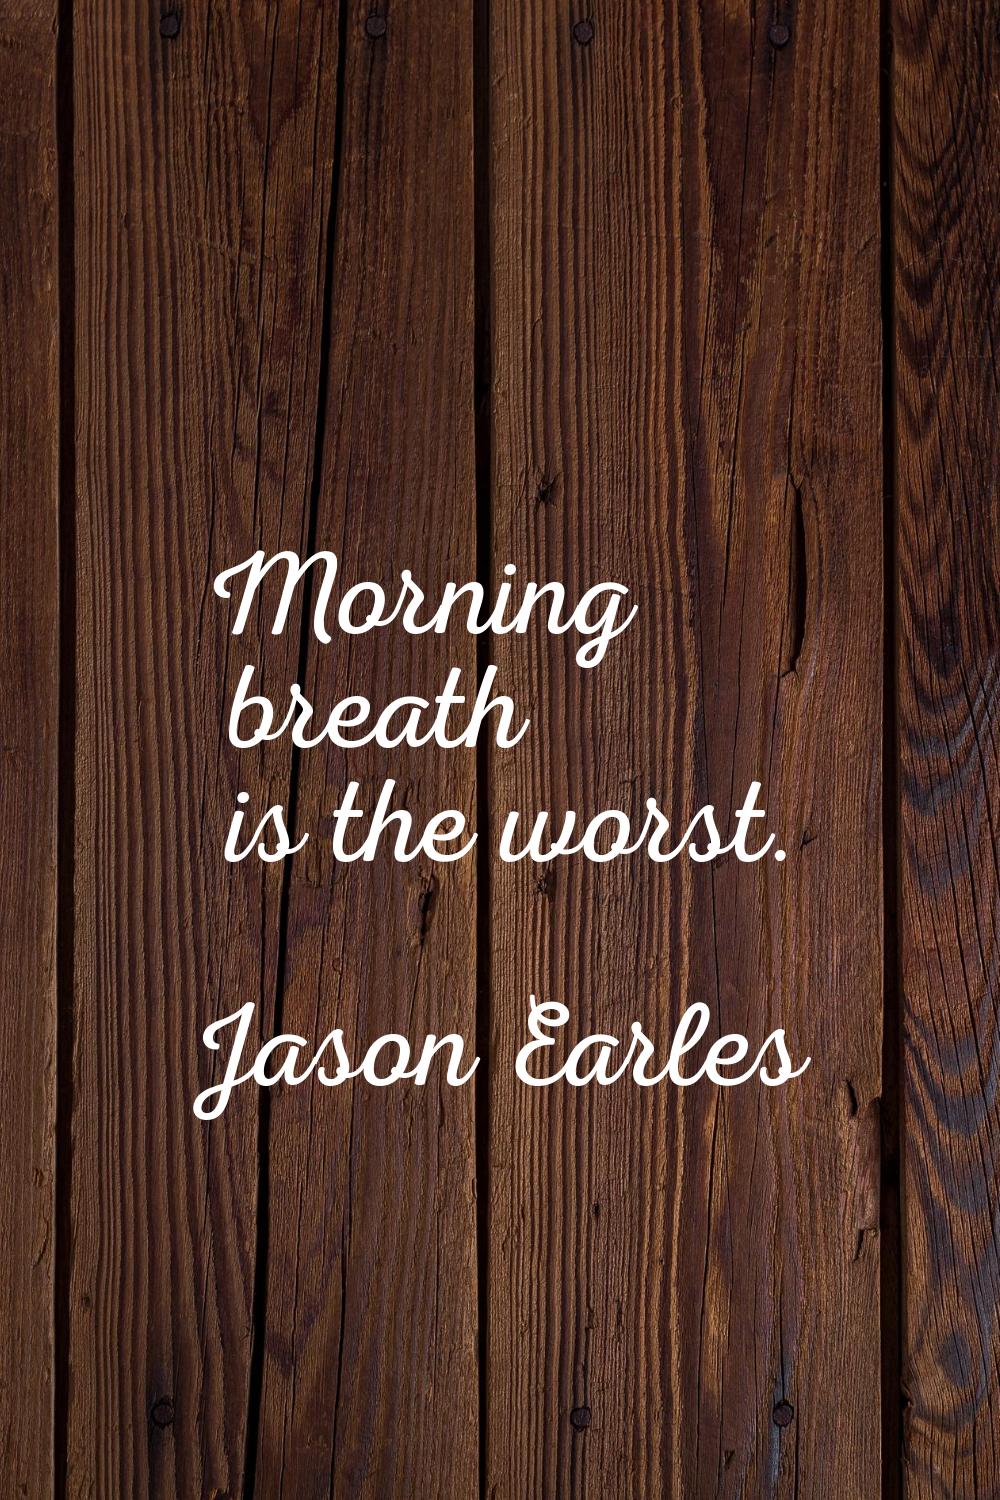 Morning breath is the worst.